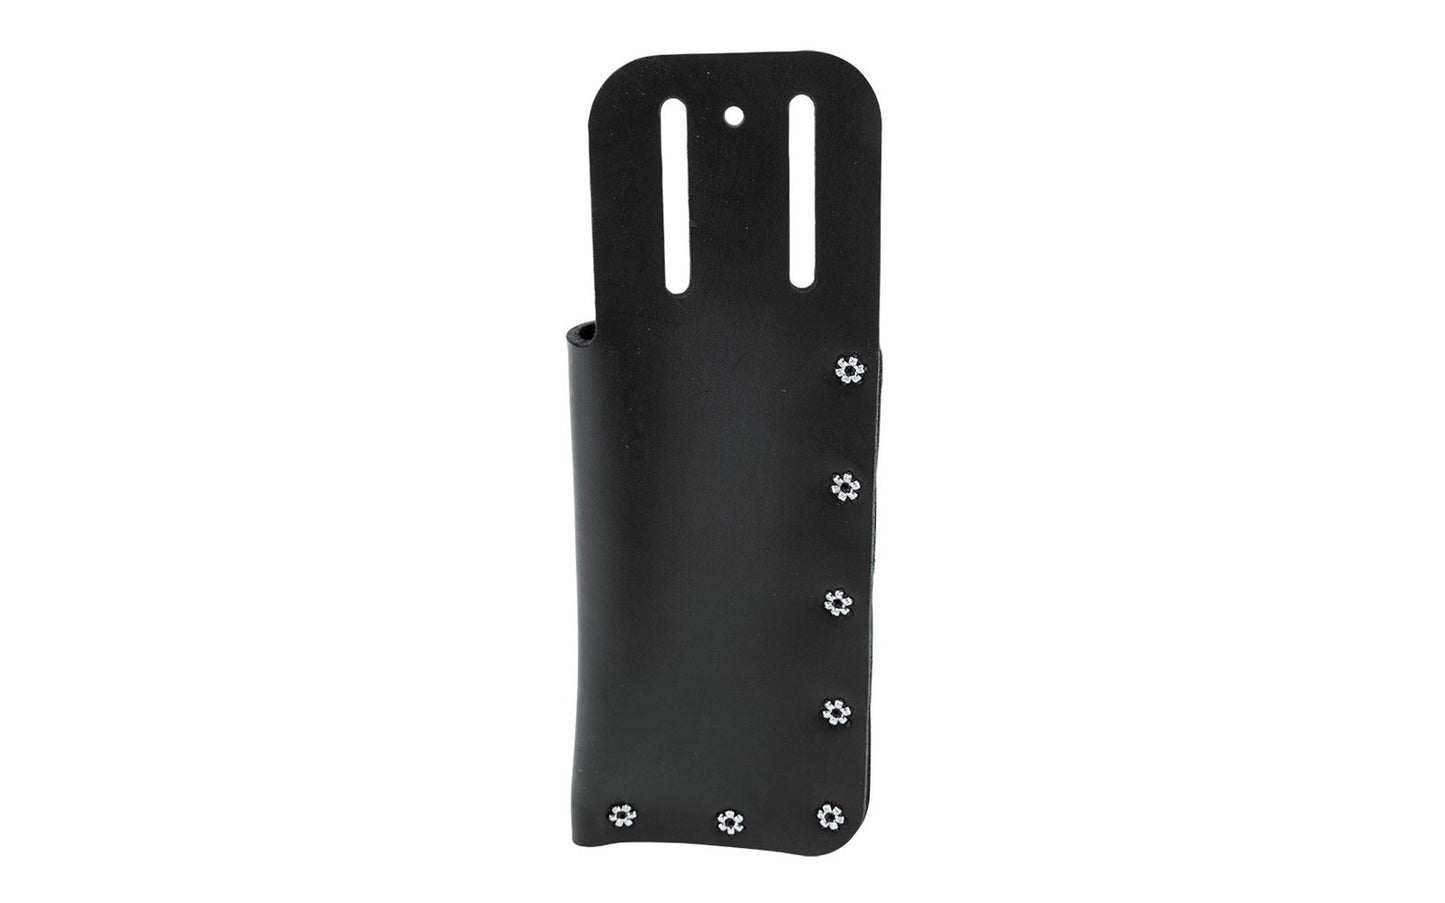 Klein Leather Lineman's Knife Holder ~ 2" Opening - 5163 - Made in USA ~ Slotted to fit belts up to 2" wide ~ Riveted leather construction for long life  - Designed for Klein Skinning Knives (Cat. No. 1570-3, 1570-3LR and 1560-3) - Leather Tool Pouch Holder - Model 5163